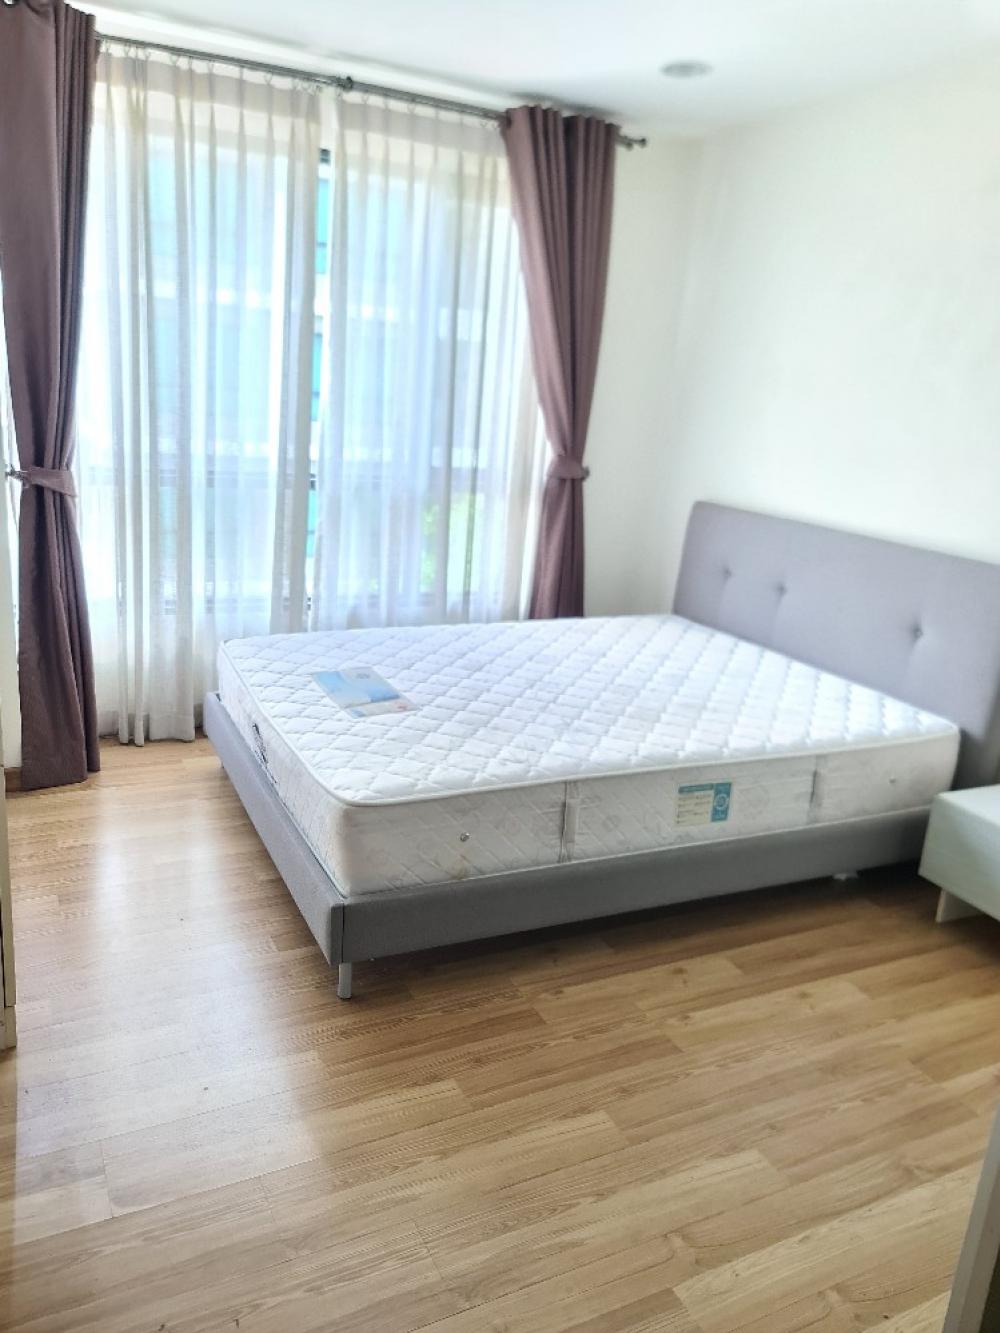 For RentCondoKaset Nawamin,Ladplakao : Condo Premio Prime Kaset-Nawamin, room size 34.5 square meters, 2 air conditioners, living room and kitchen separated from each other, Building B, 4th floor.